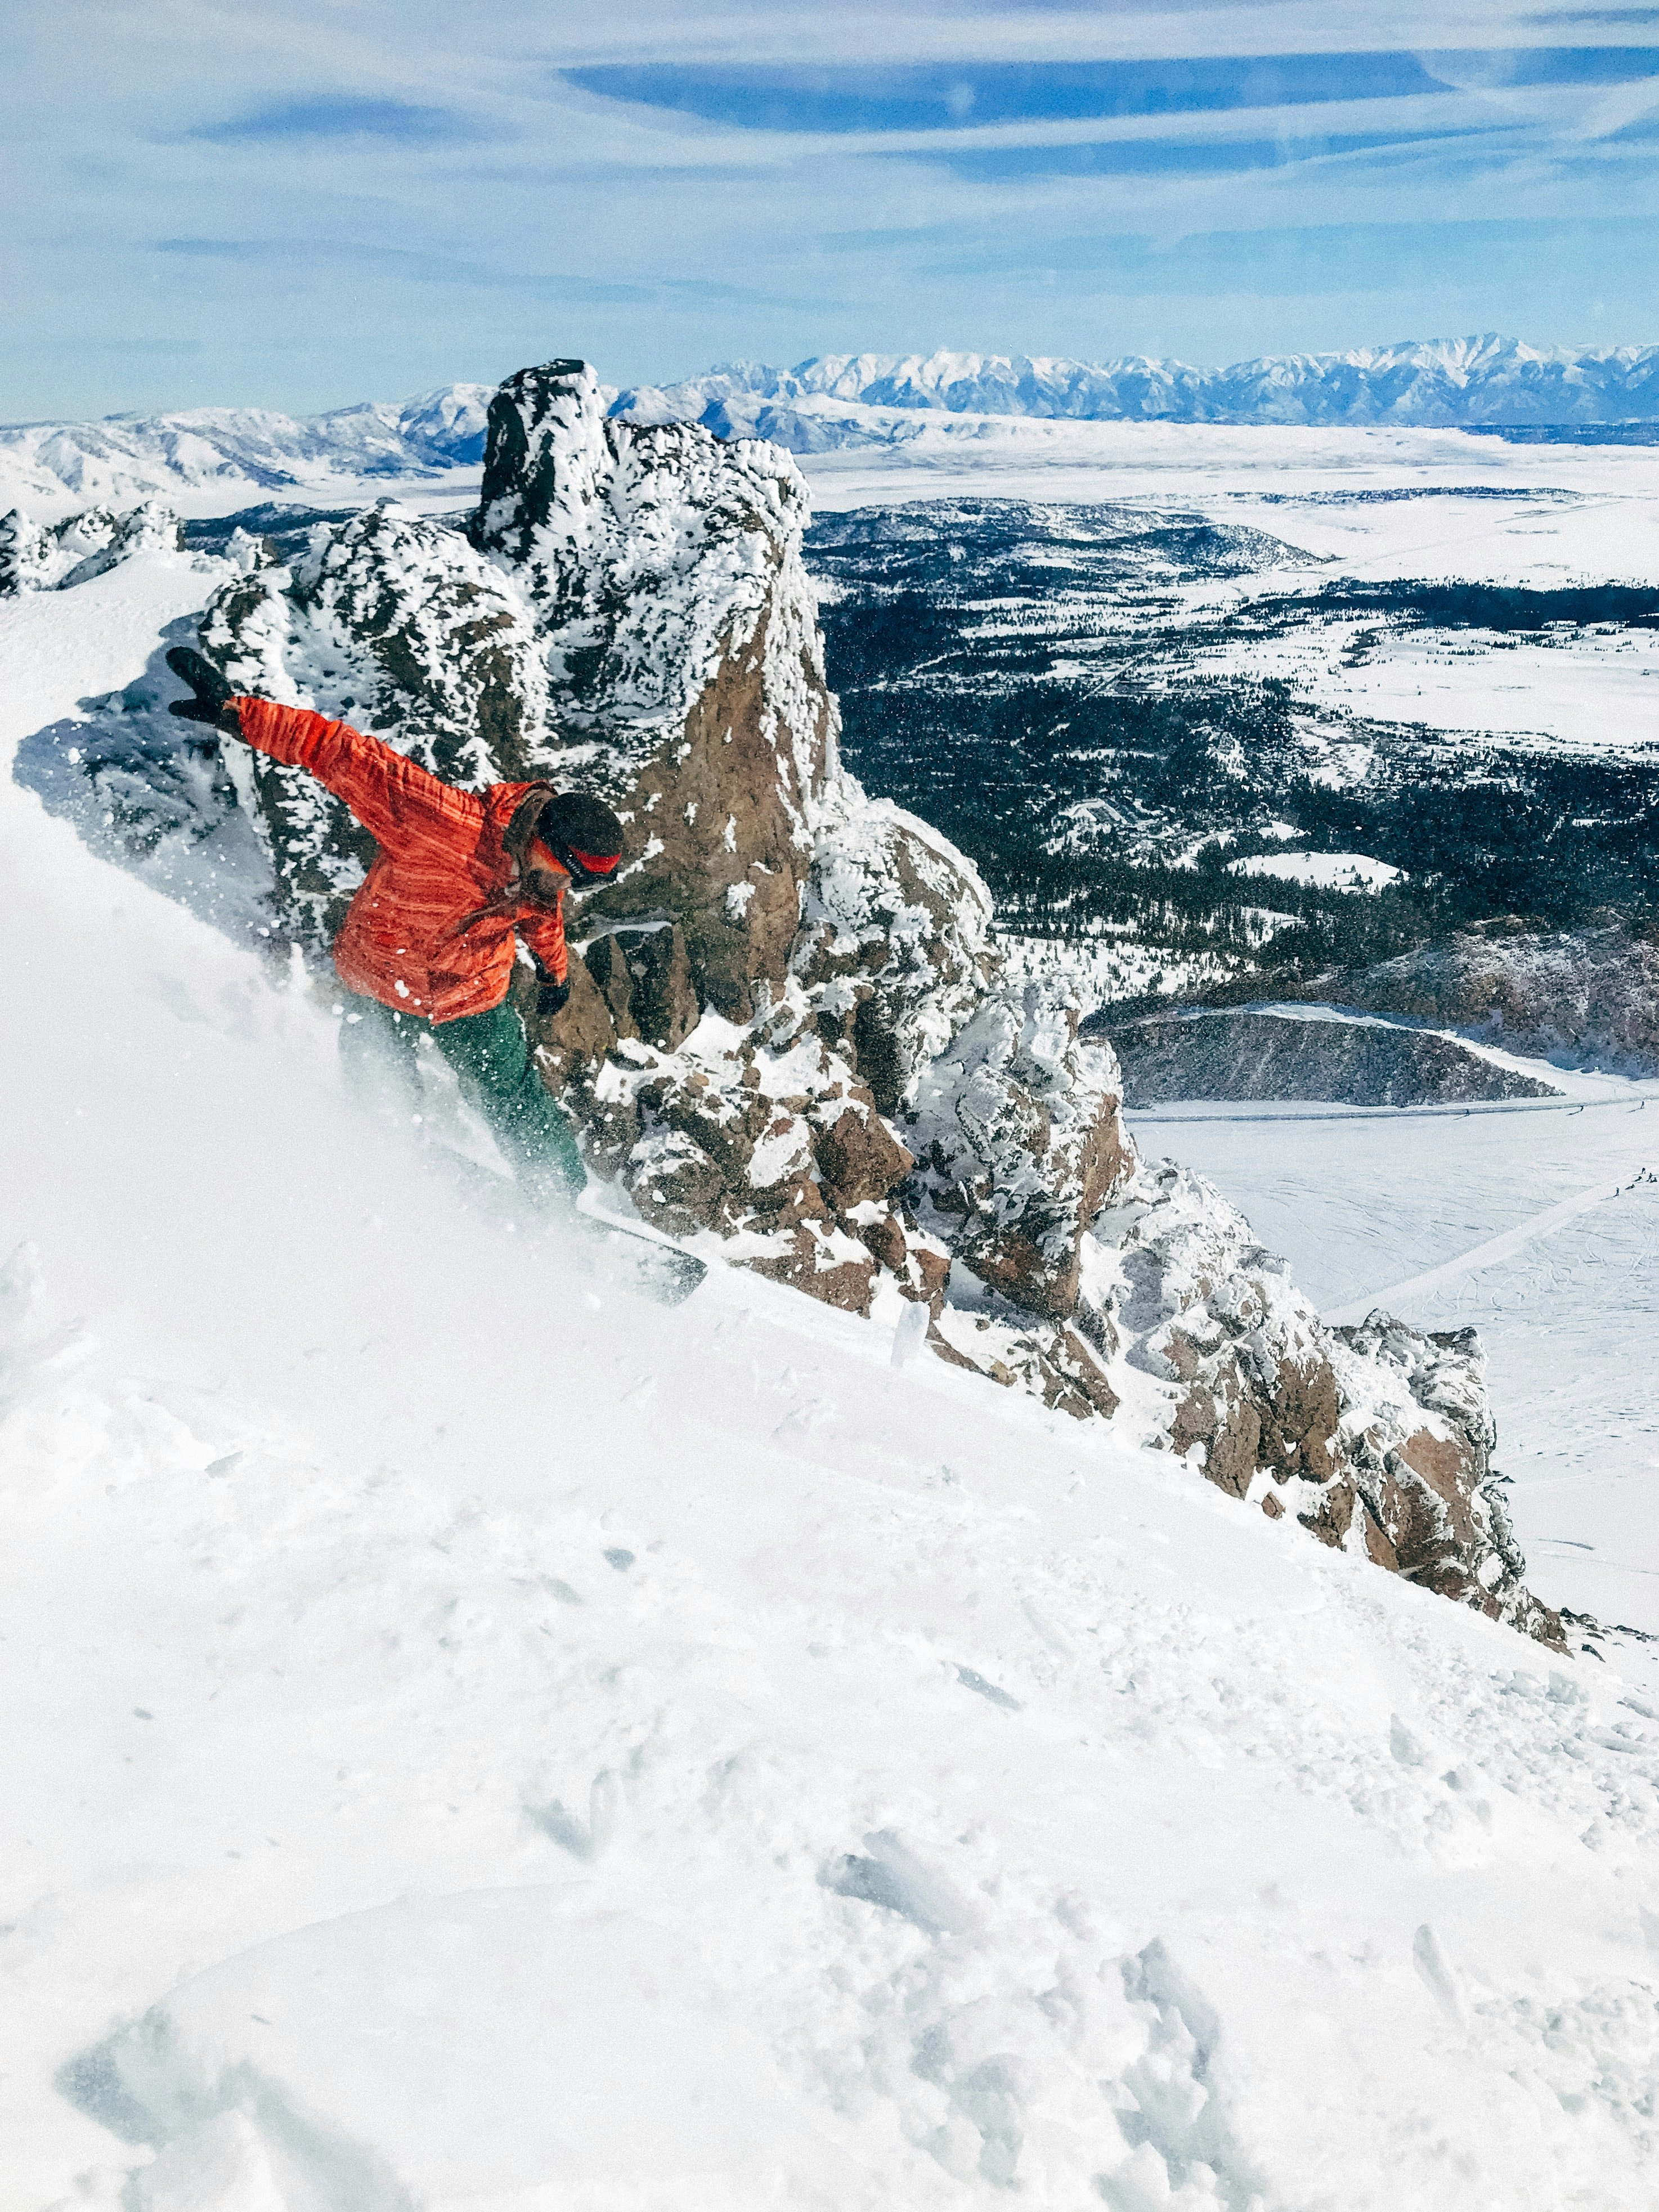 The best ski passes in the world